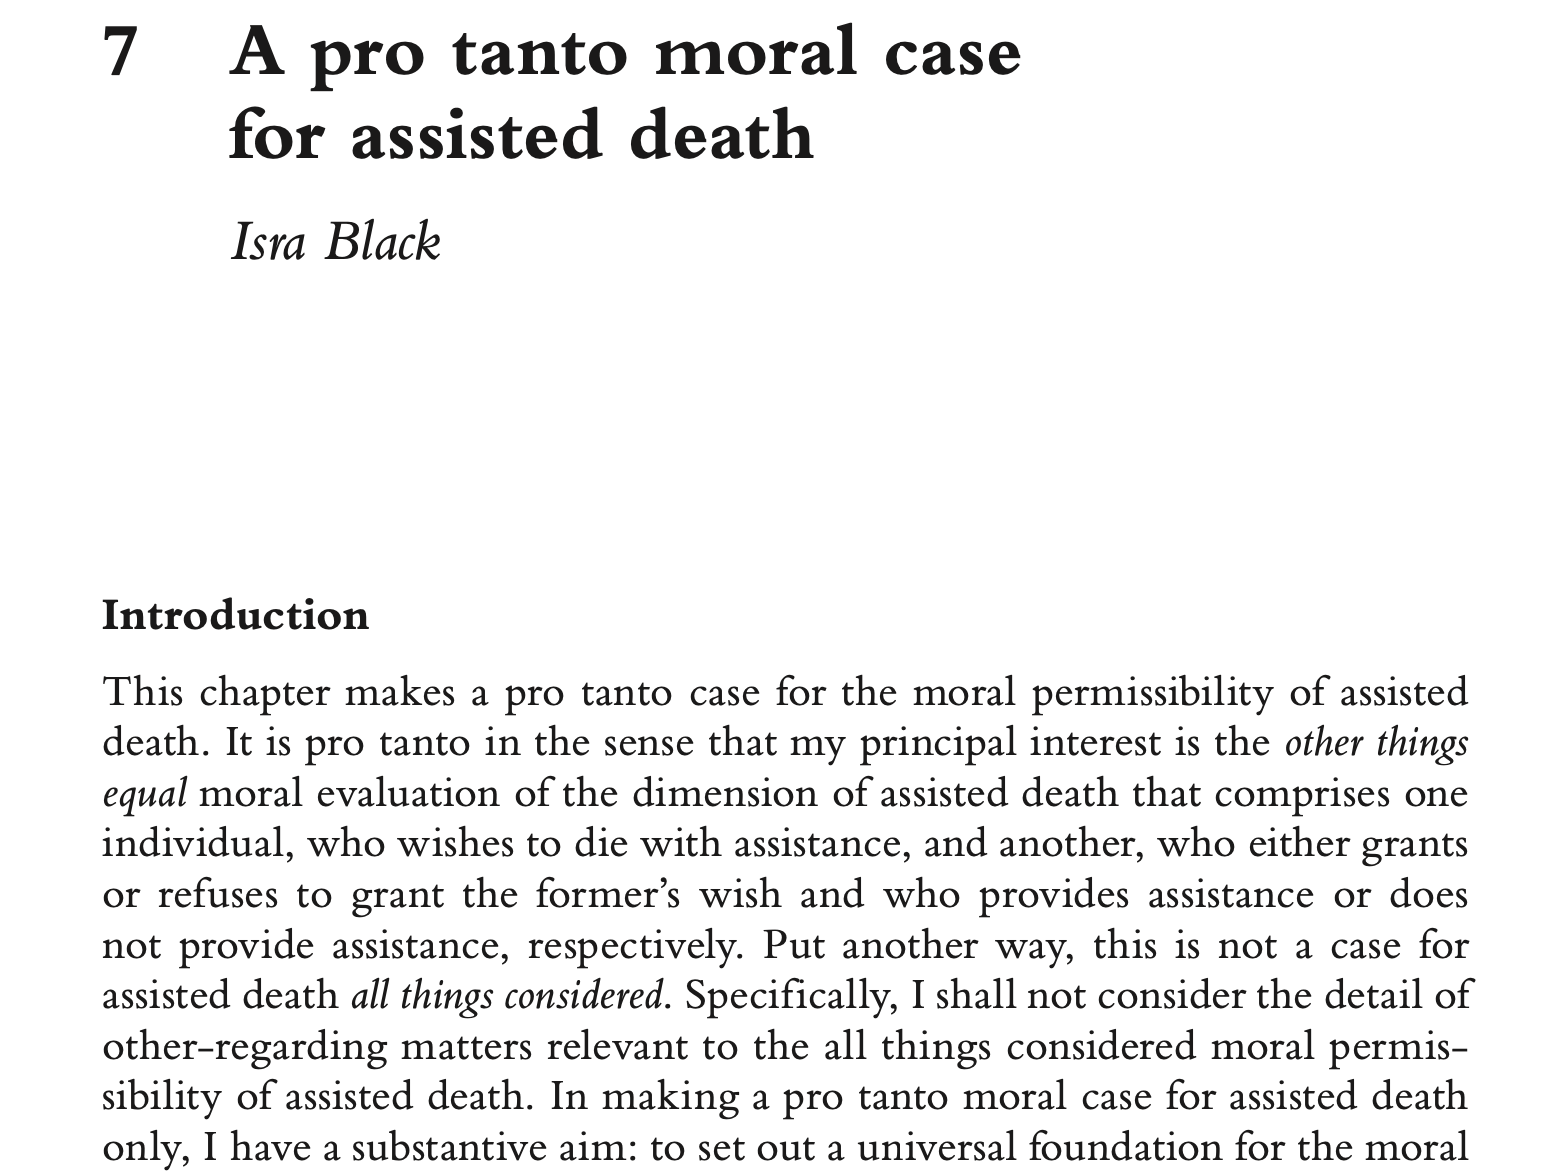 a pro tanto moral case for assisted death